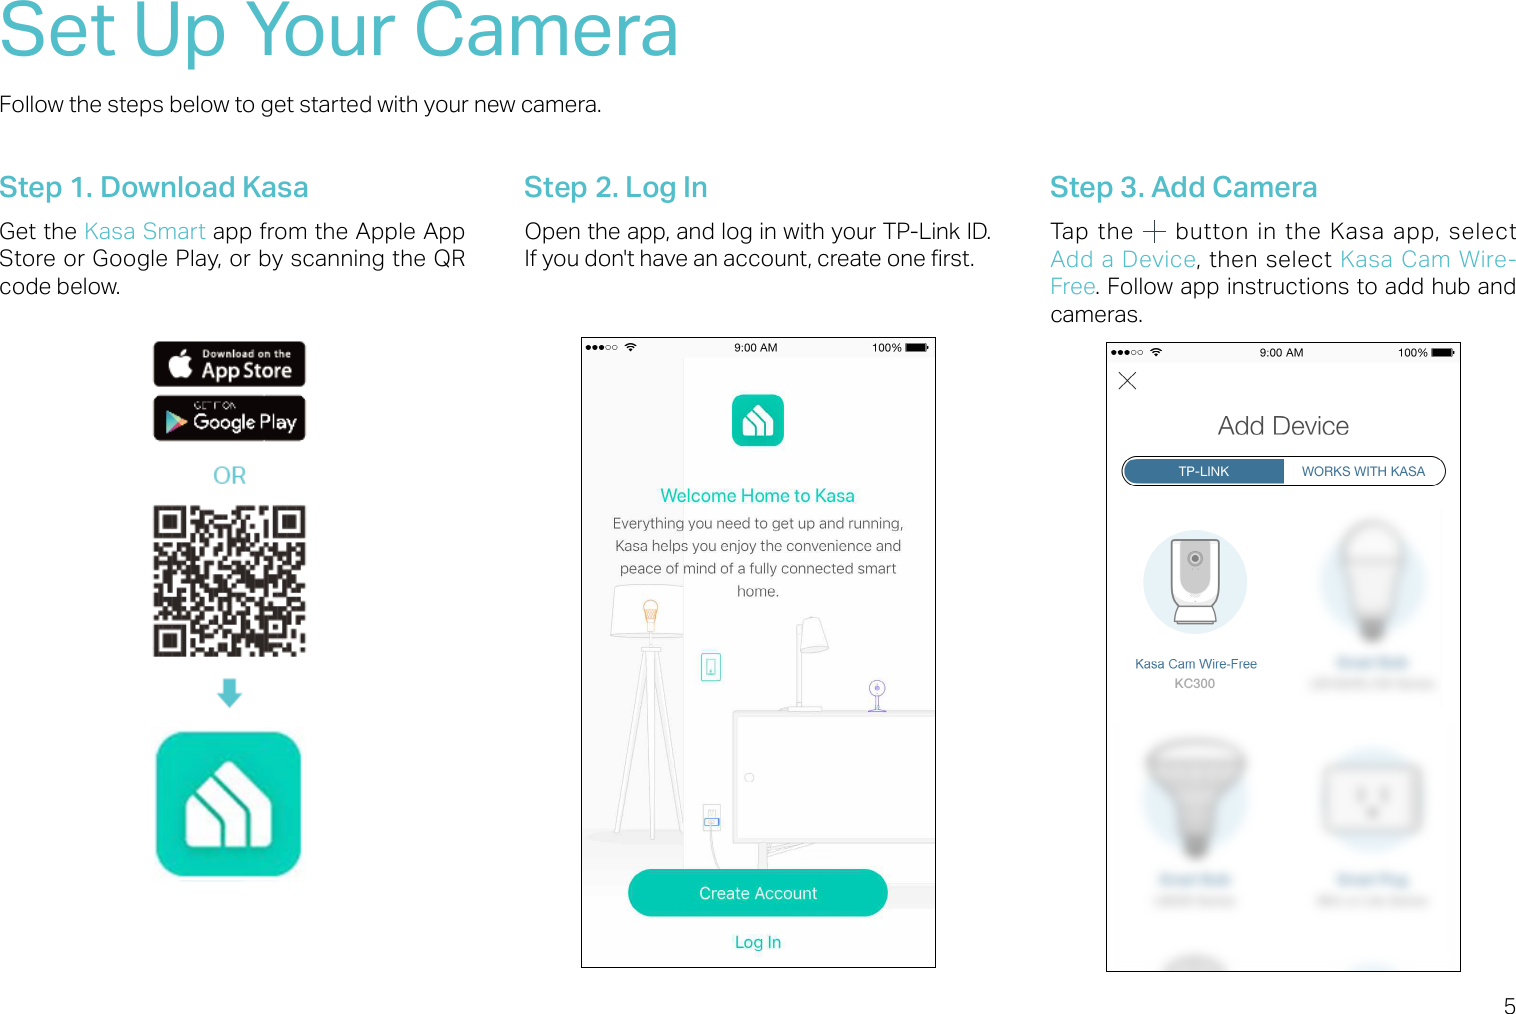 5Set Up Your CameraFollow the steps below to get started with your new camera.Step 1. Download KasaGet the Kasa Smart app from the Apple App Store or Google Play, or by scanning the QR code below.Step 2. Log InOpen the app, and log in with your TP-Link ID. If you don&apos;t have an account, create one rst.Step 3. Add CameraTap the    button  in  the  Kasa  app,  select Add a  Device, then select Kasa  Cam  Wire-Free. Follow app instructions to add hub and cameras. 